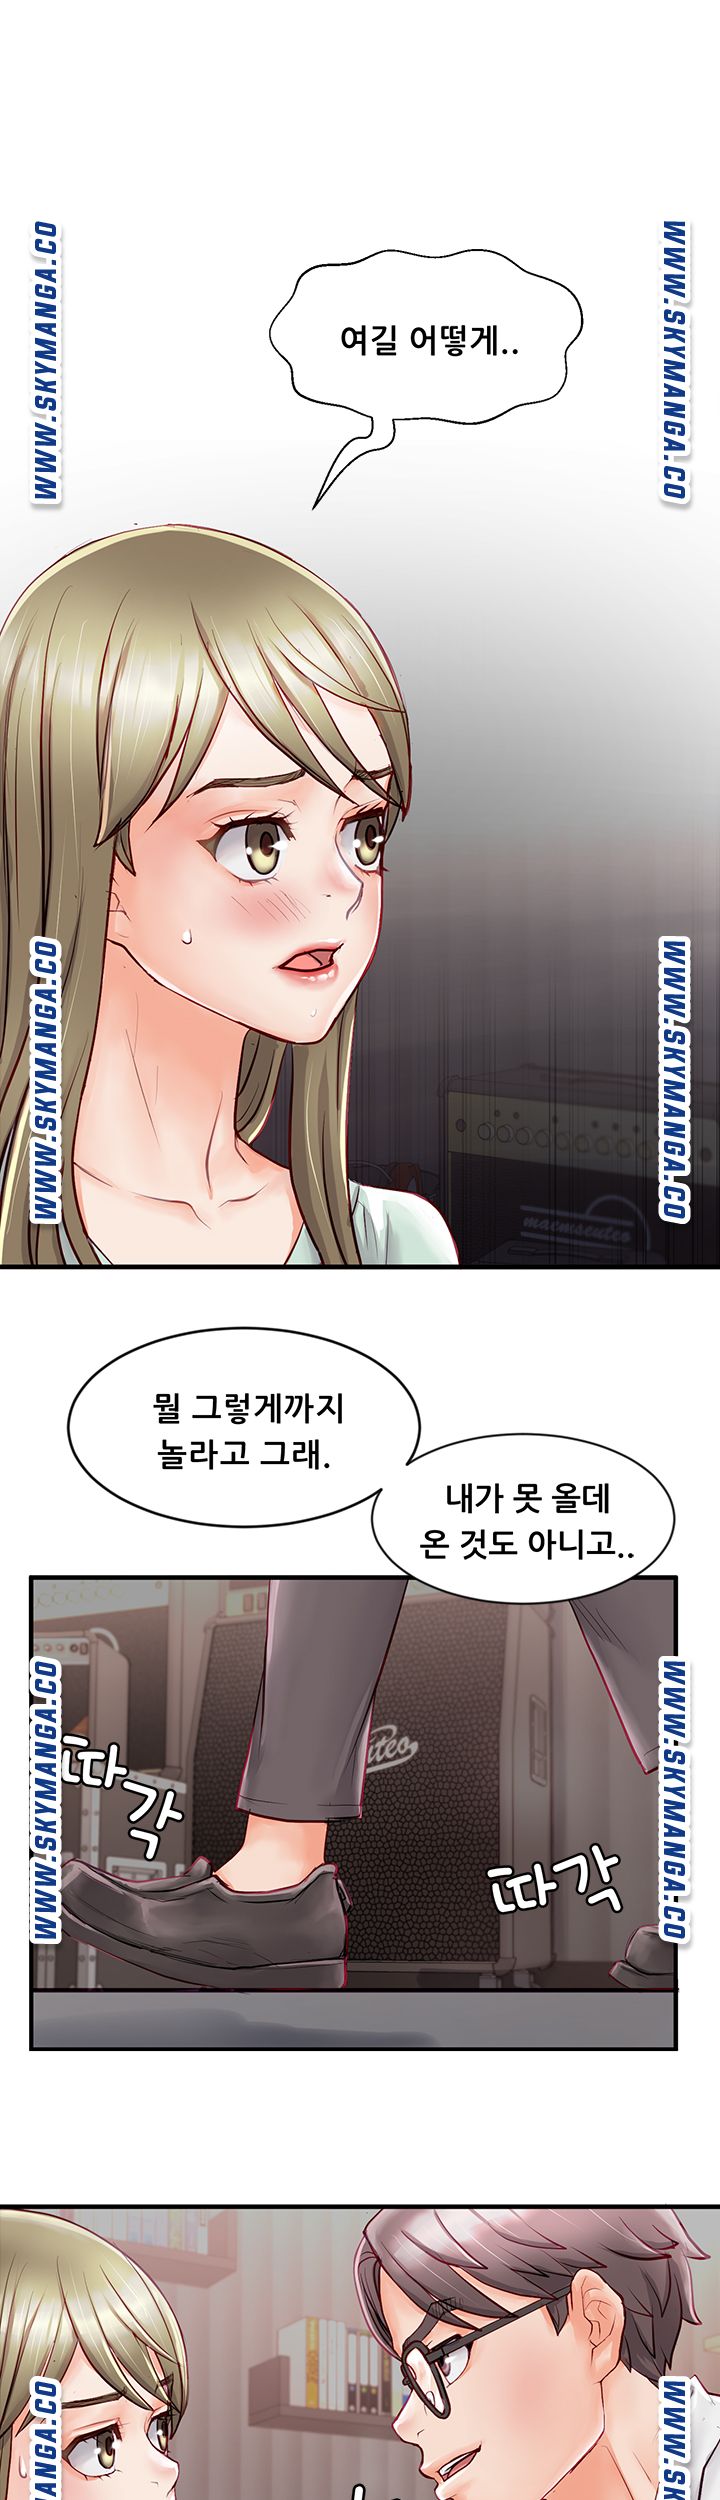 Broadcasting Club Raw - Chapter 2 Page 55